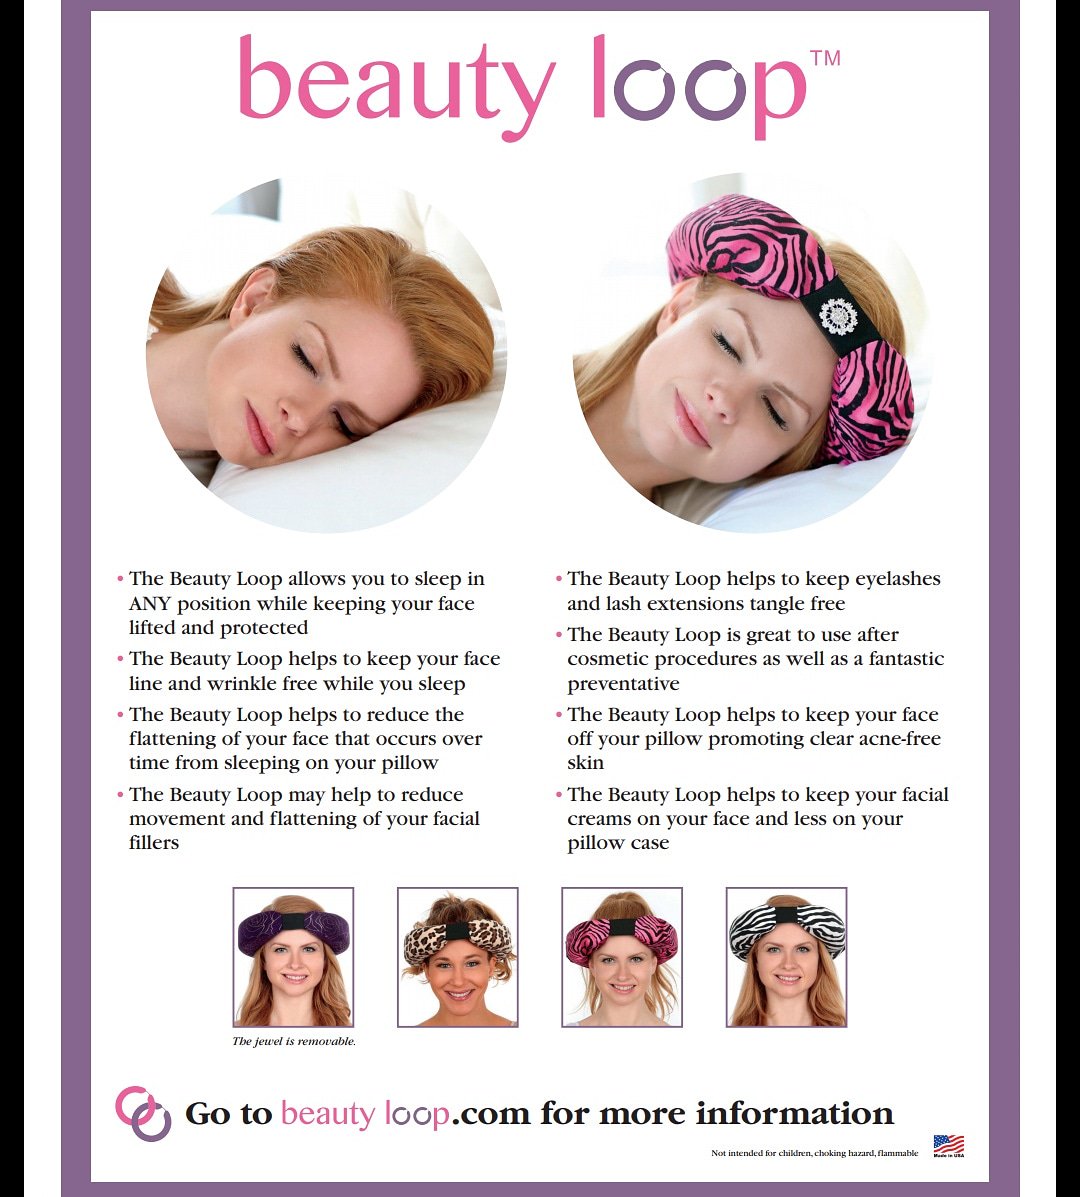 It's official! #MyBeautyLoop is now available in only the best #skincarespecialist offices and #EyelashExtension studios in the USA! Check out our display! Ask your provider to carry #beautyloop today. #antiaging #antiagingpillow #skincare #antiwrinklepillow #antiwrinkle #beauty